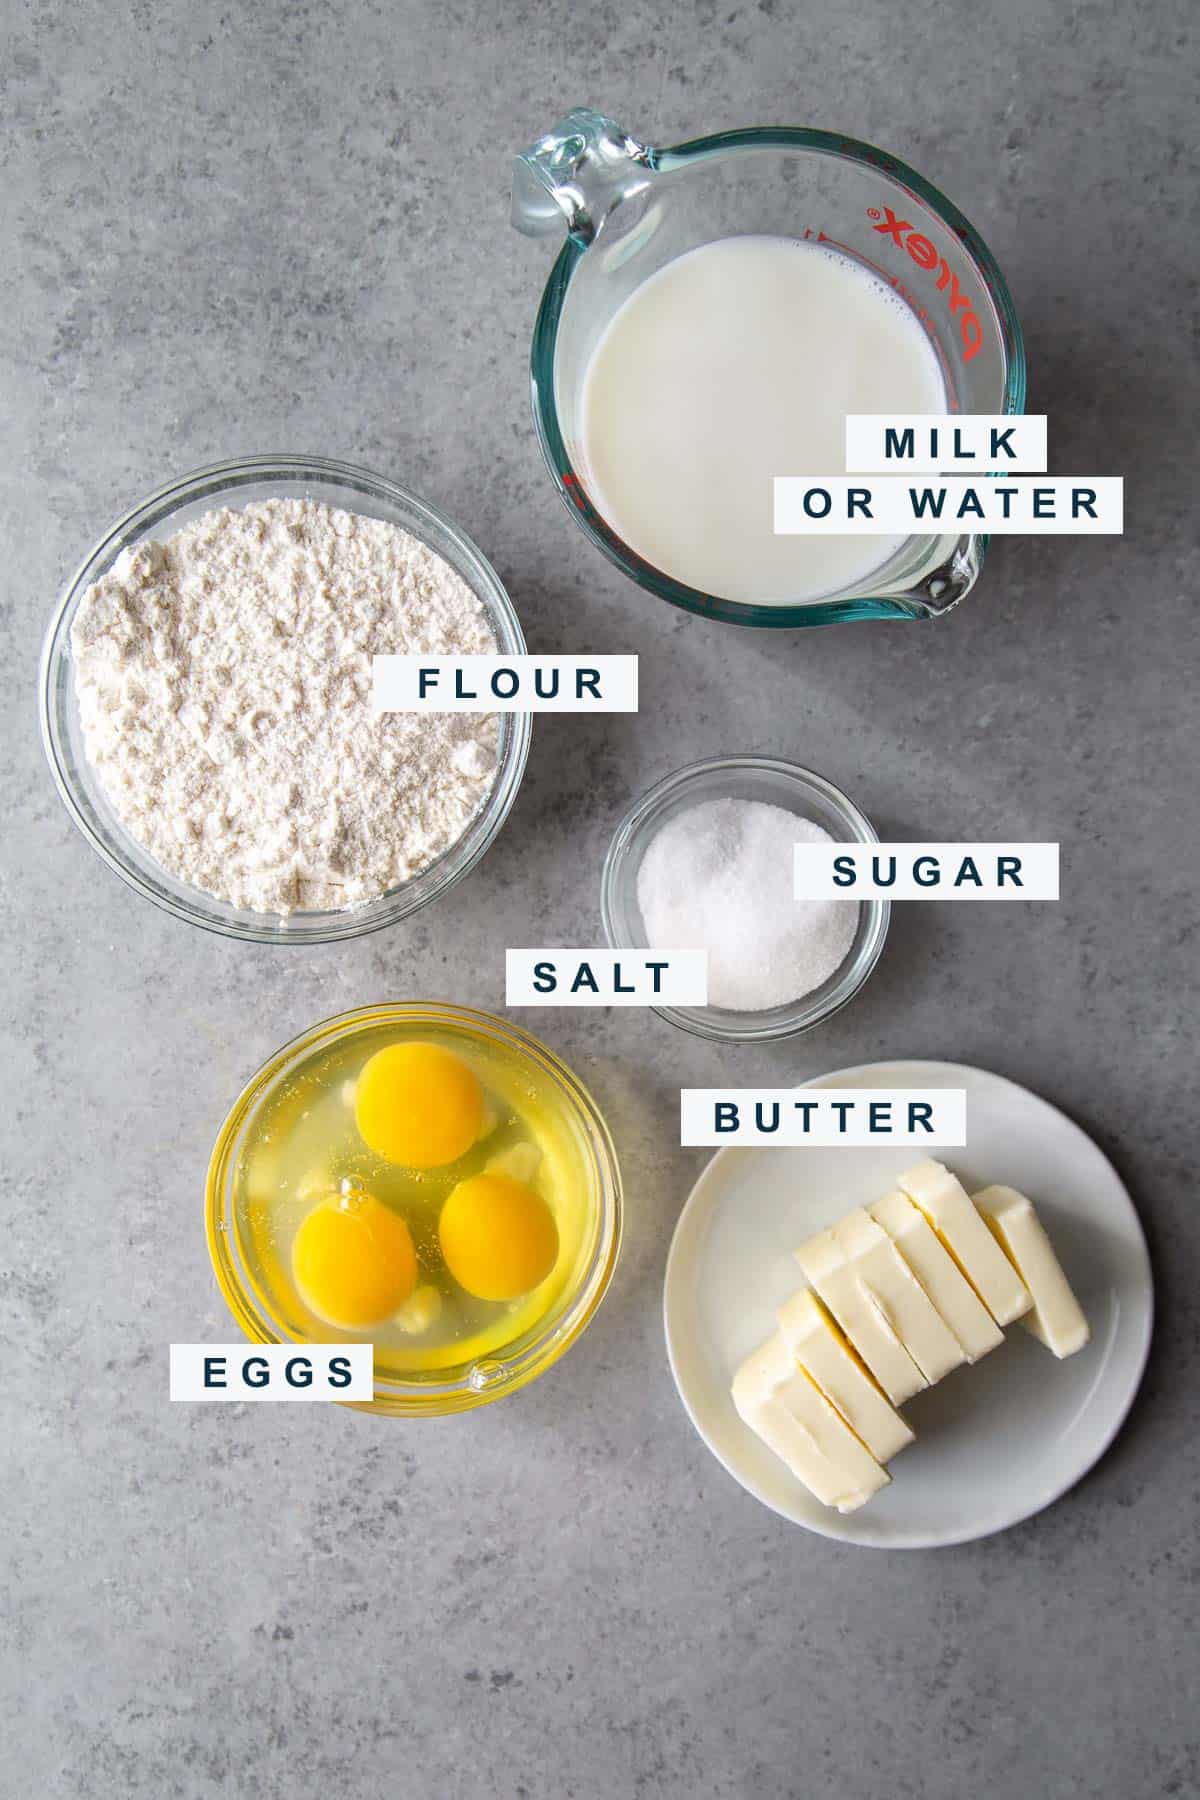 ingredients needed to make choux pastry for eclairs include butter, eggs, flour, and water or milk. 